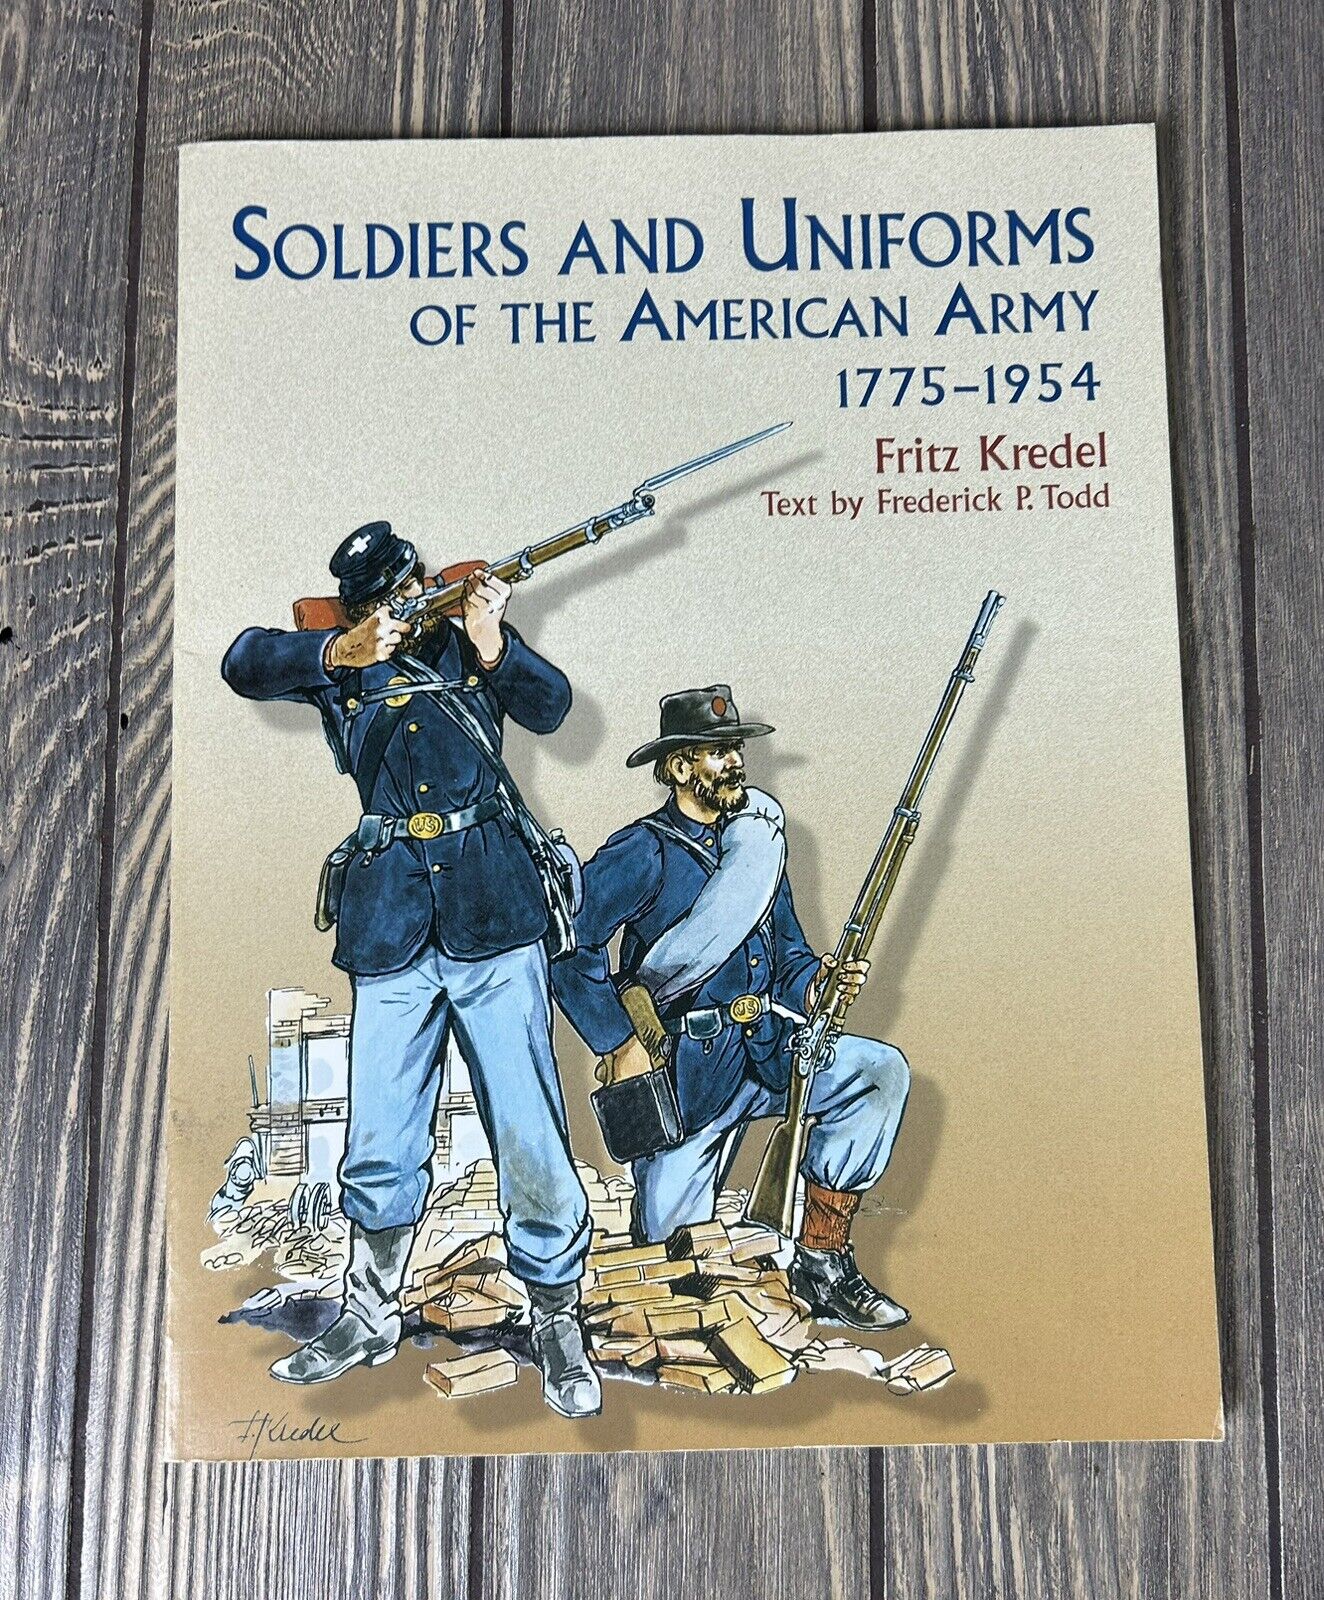 2005 Soldiers And Uniforms Of The American Army Book 1775 - 1954